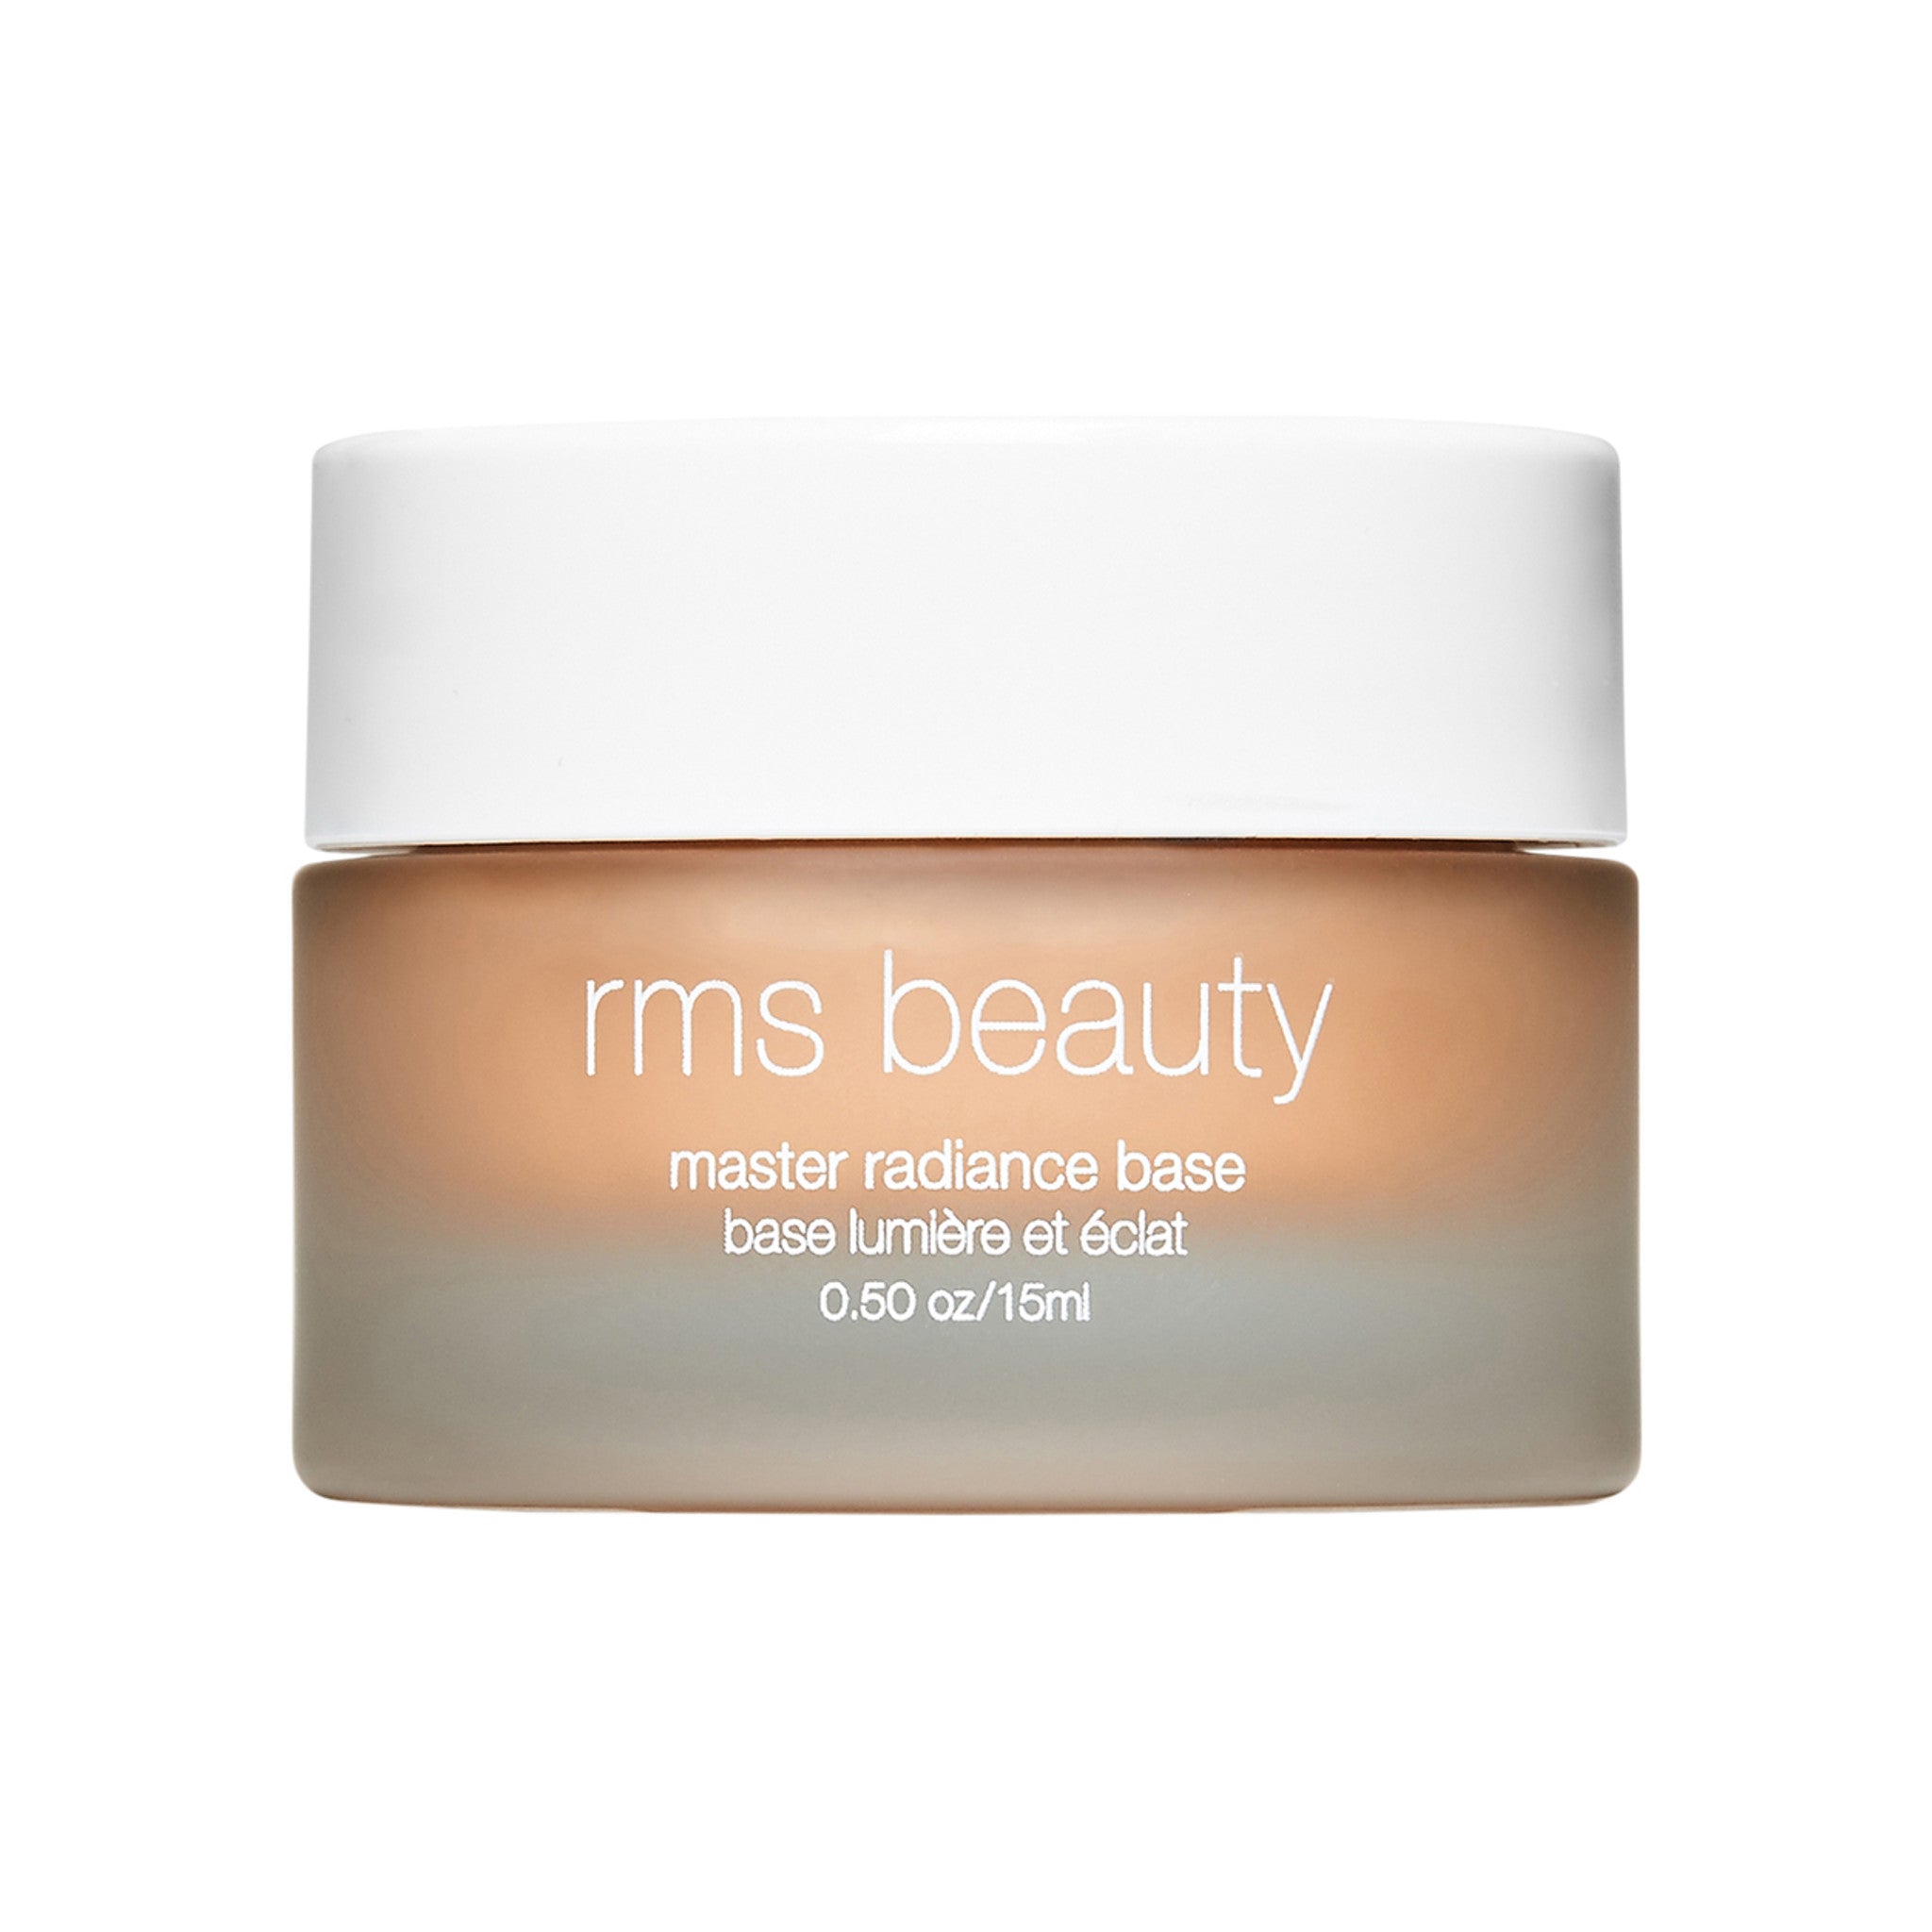 RMS Beauty Master Radiance Base Color/Shade variant: Rich In Radiance main image.